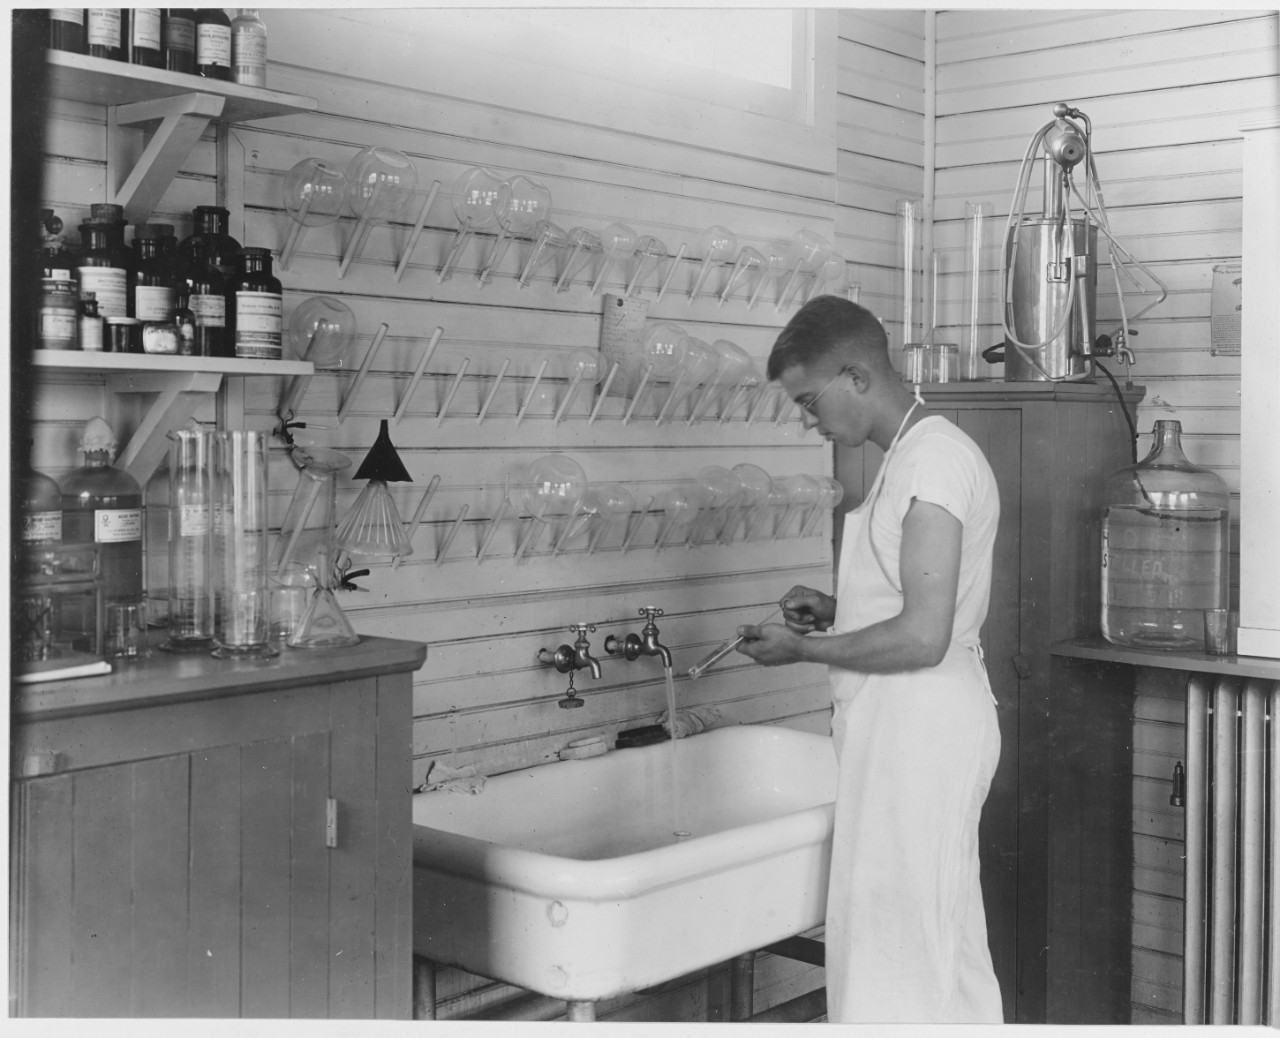 Cleaning test tubes in laboratory. U.S. Naval Hospital, New Orleans, Louisiana.